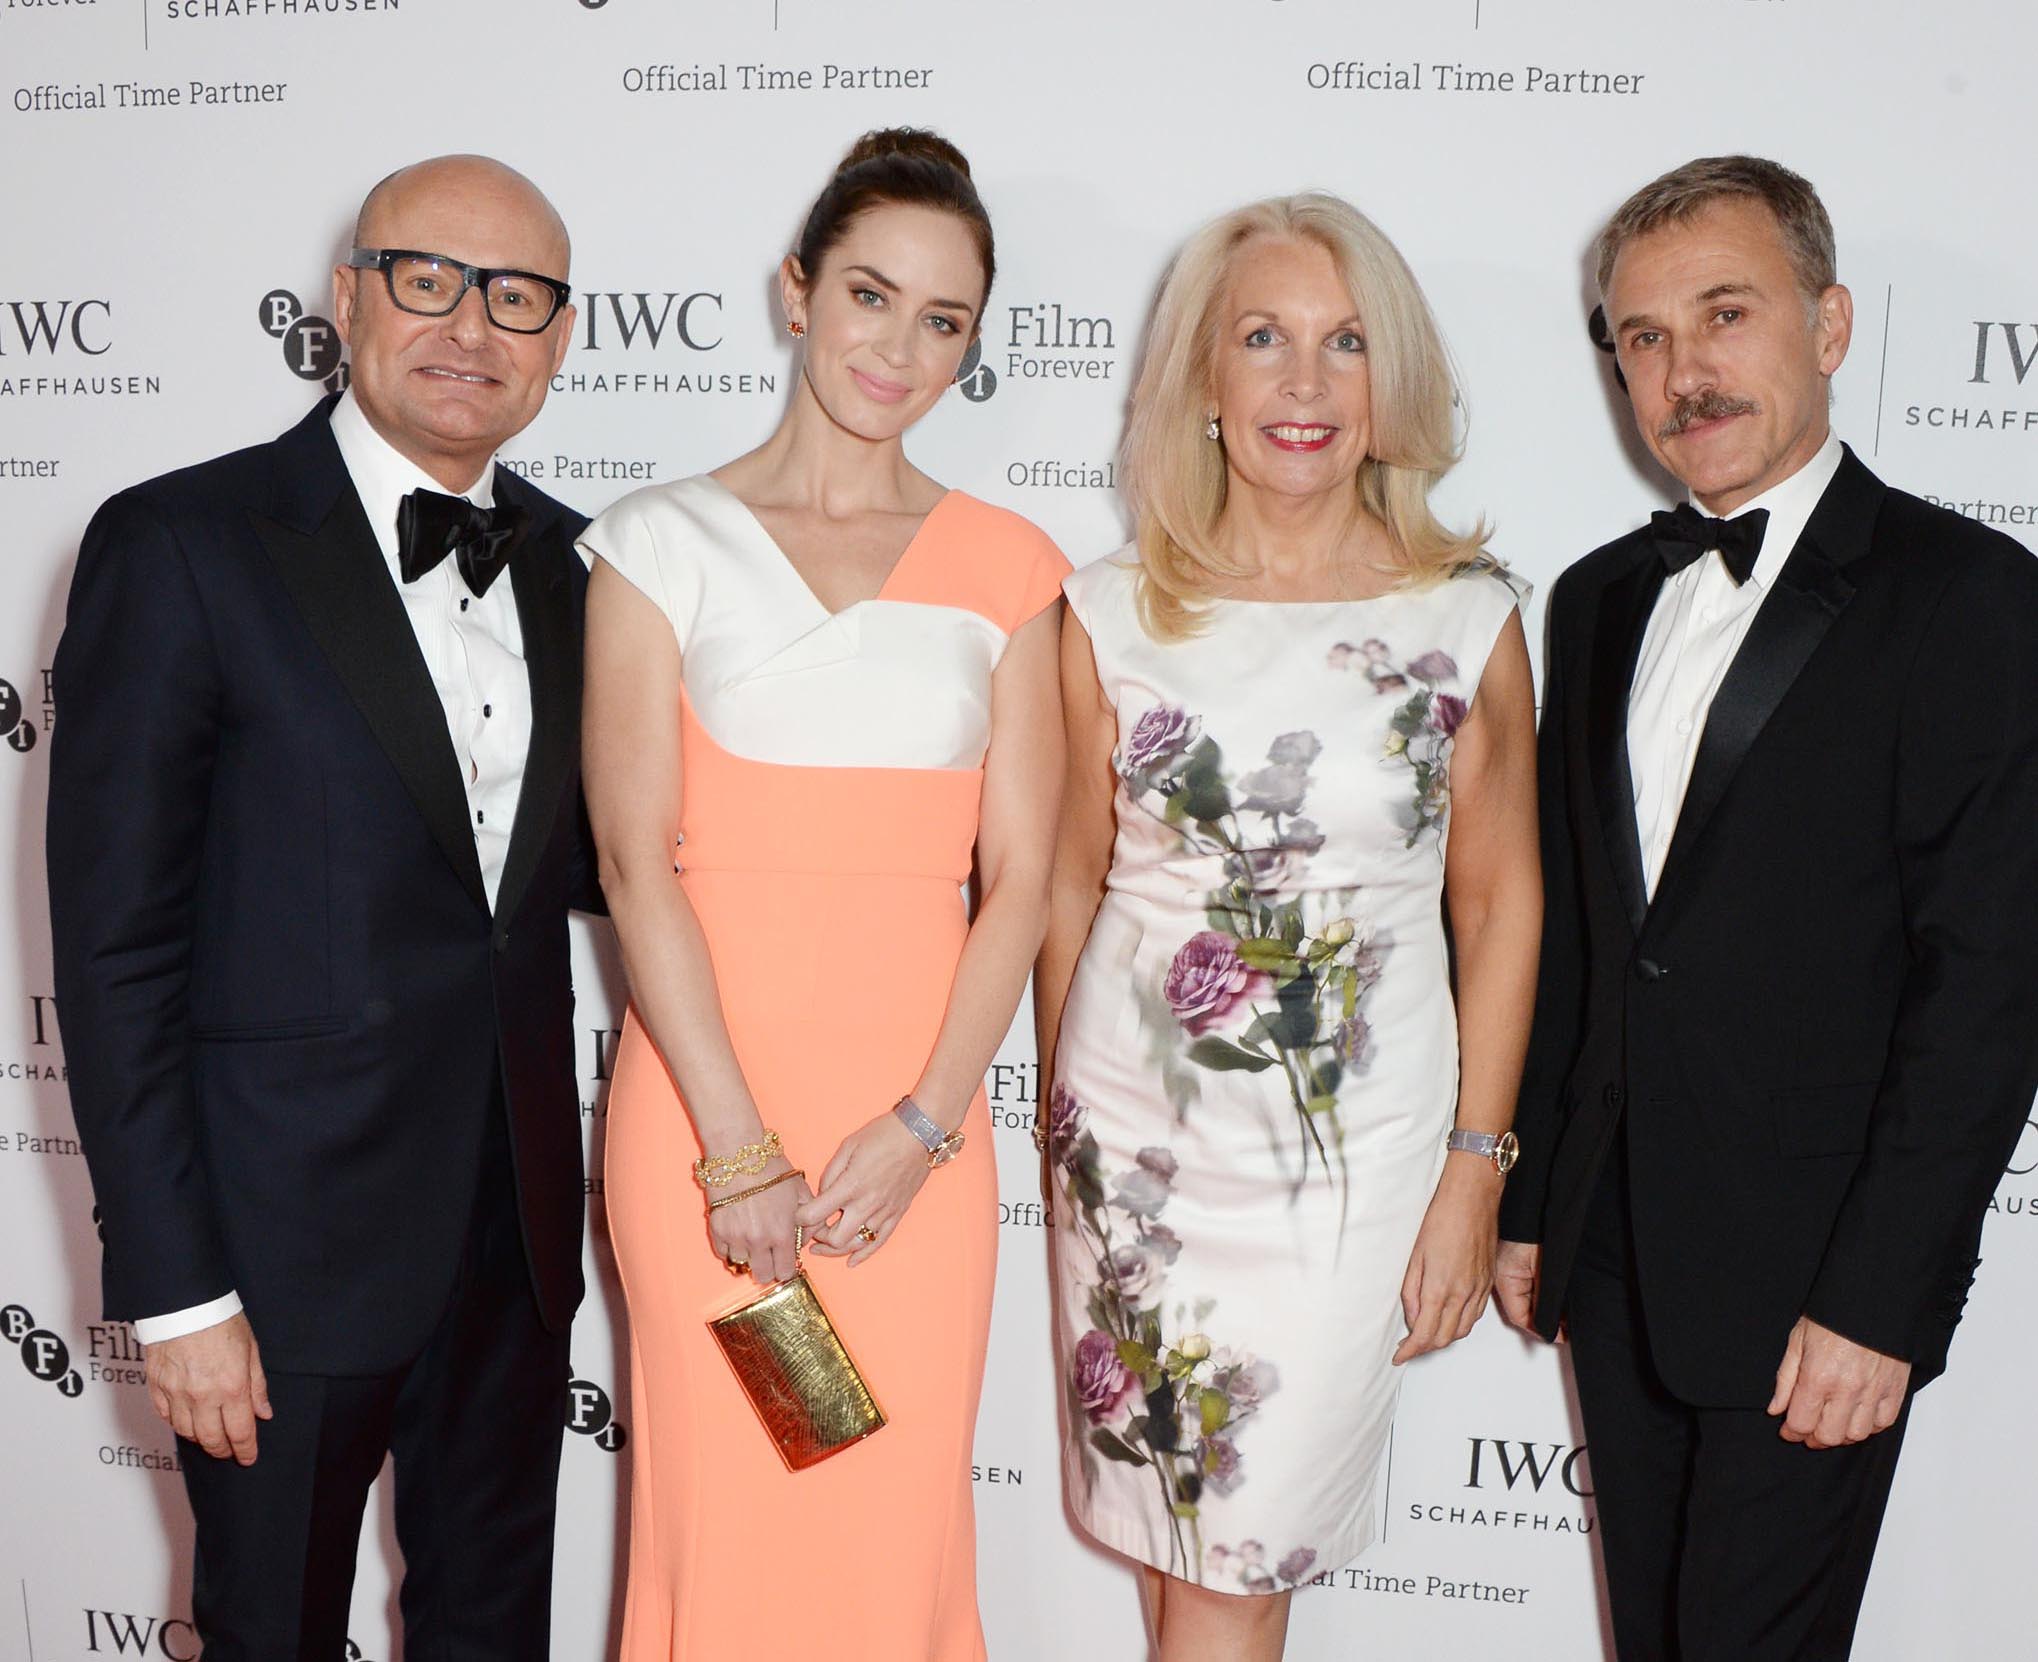 Georges kern ceo iwc schaffhausen emily blunt amanda nevill ceo of the bfi and christoph waltz attend the bfi london film festival iwc gala dinner in 2014